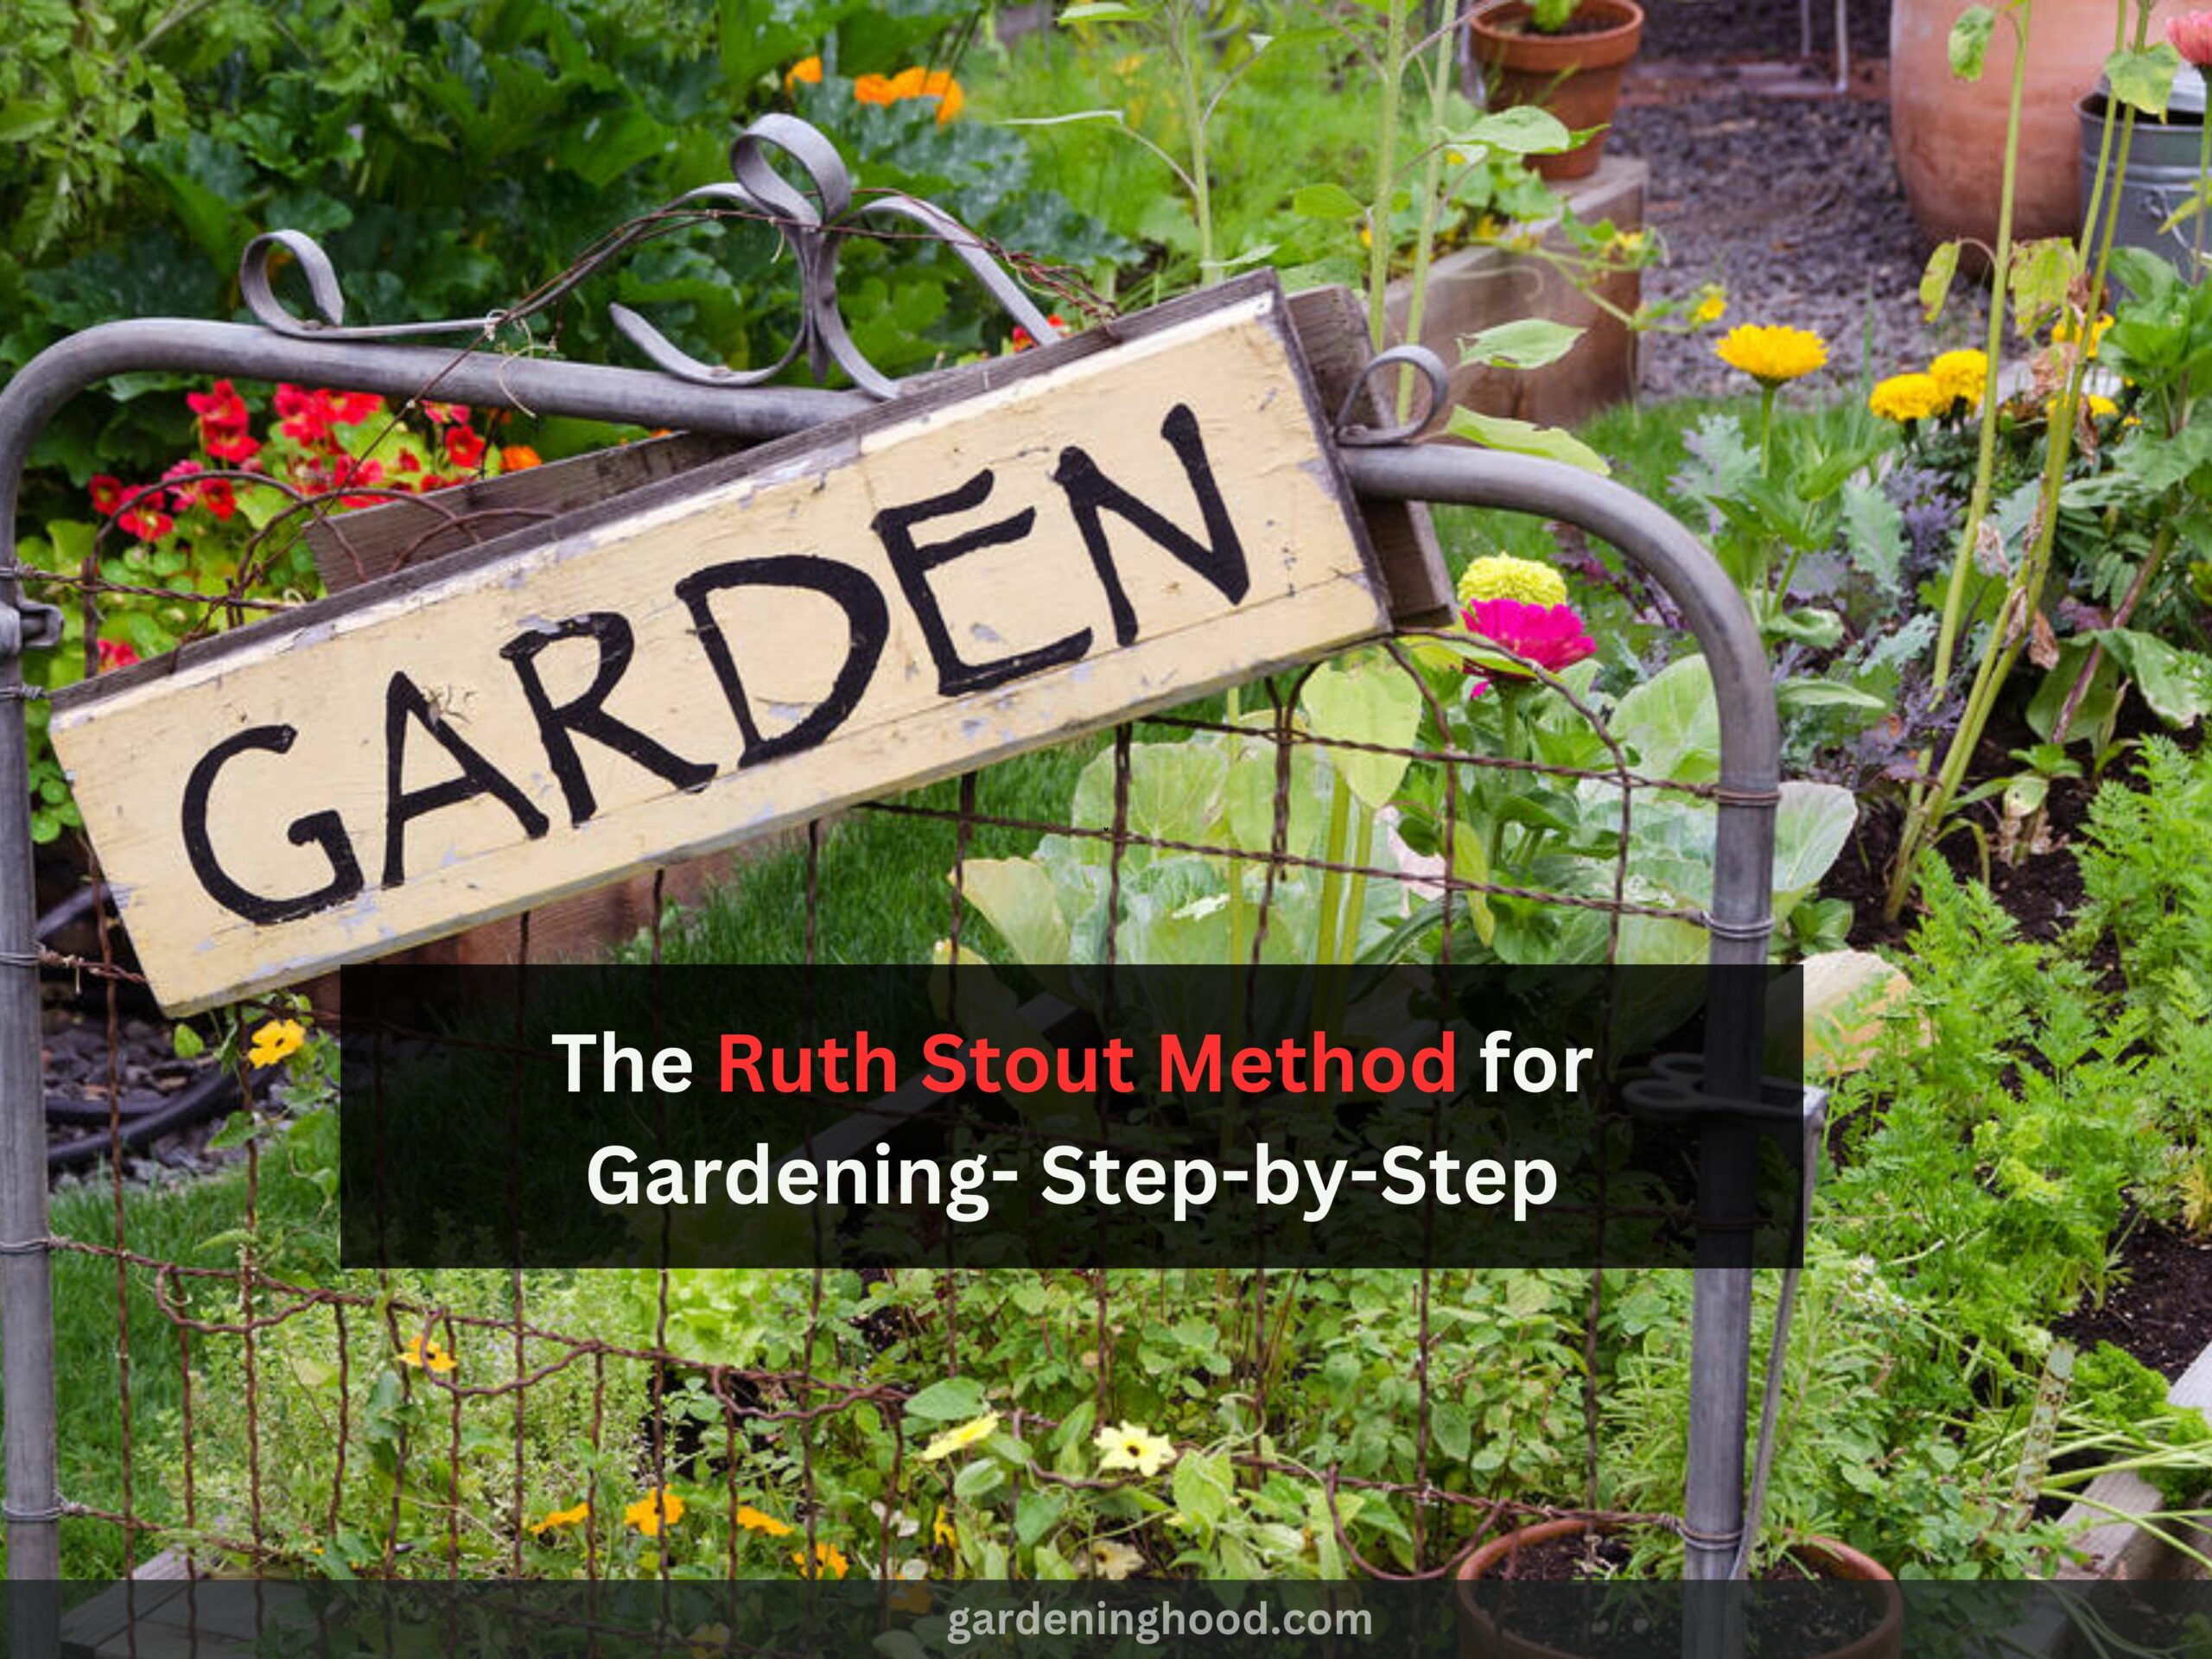 The Ruth Stout Method for Gardening- Step-by-Step